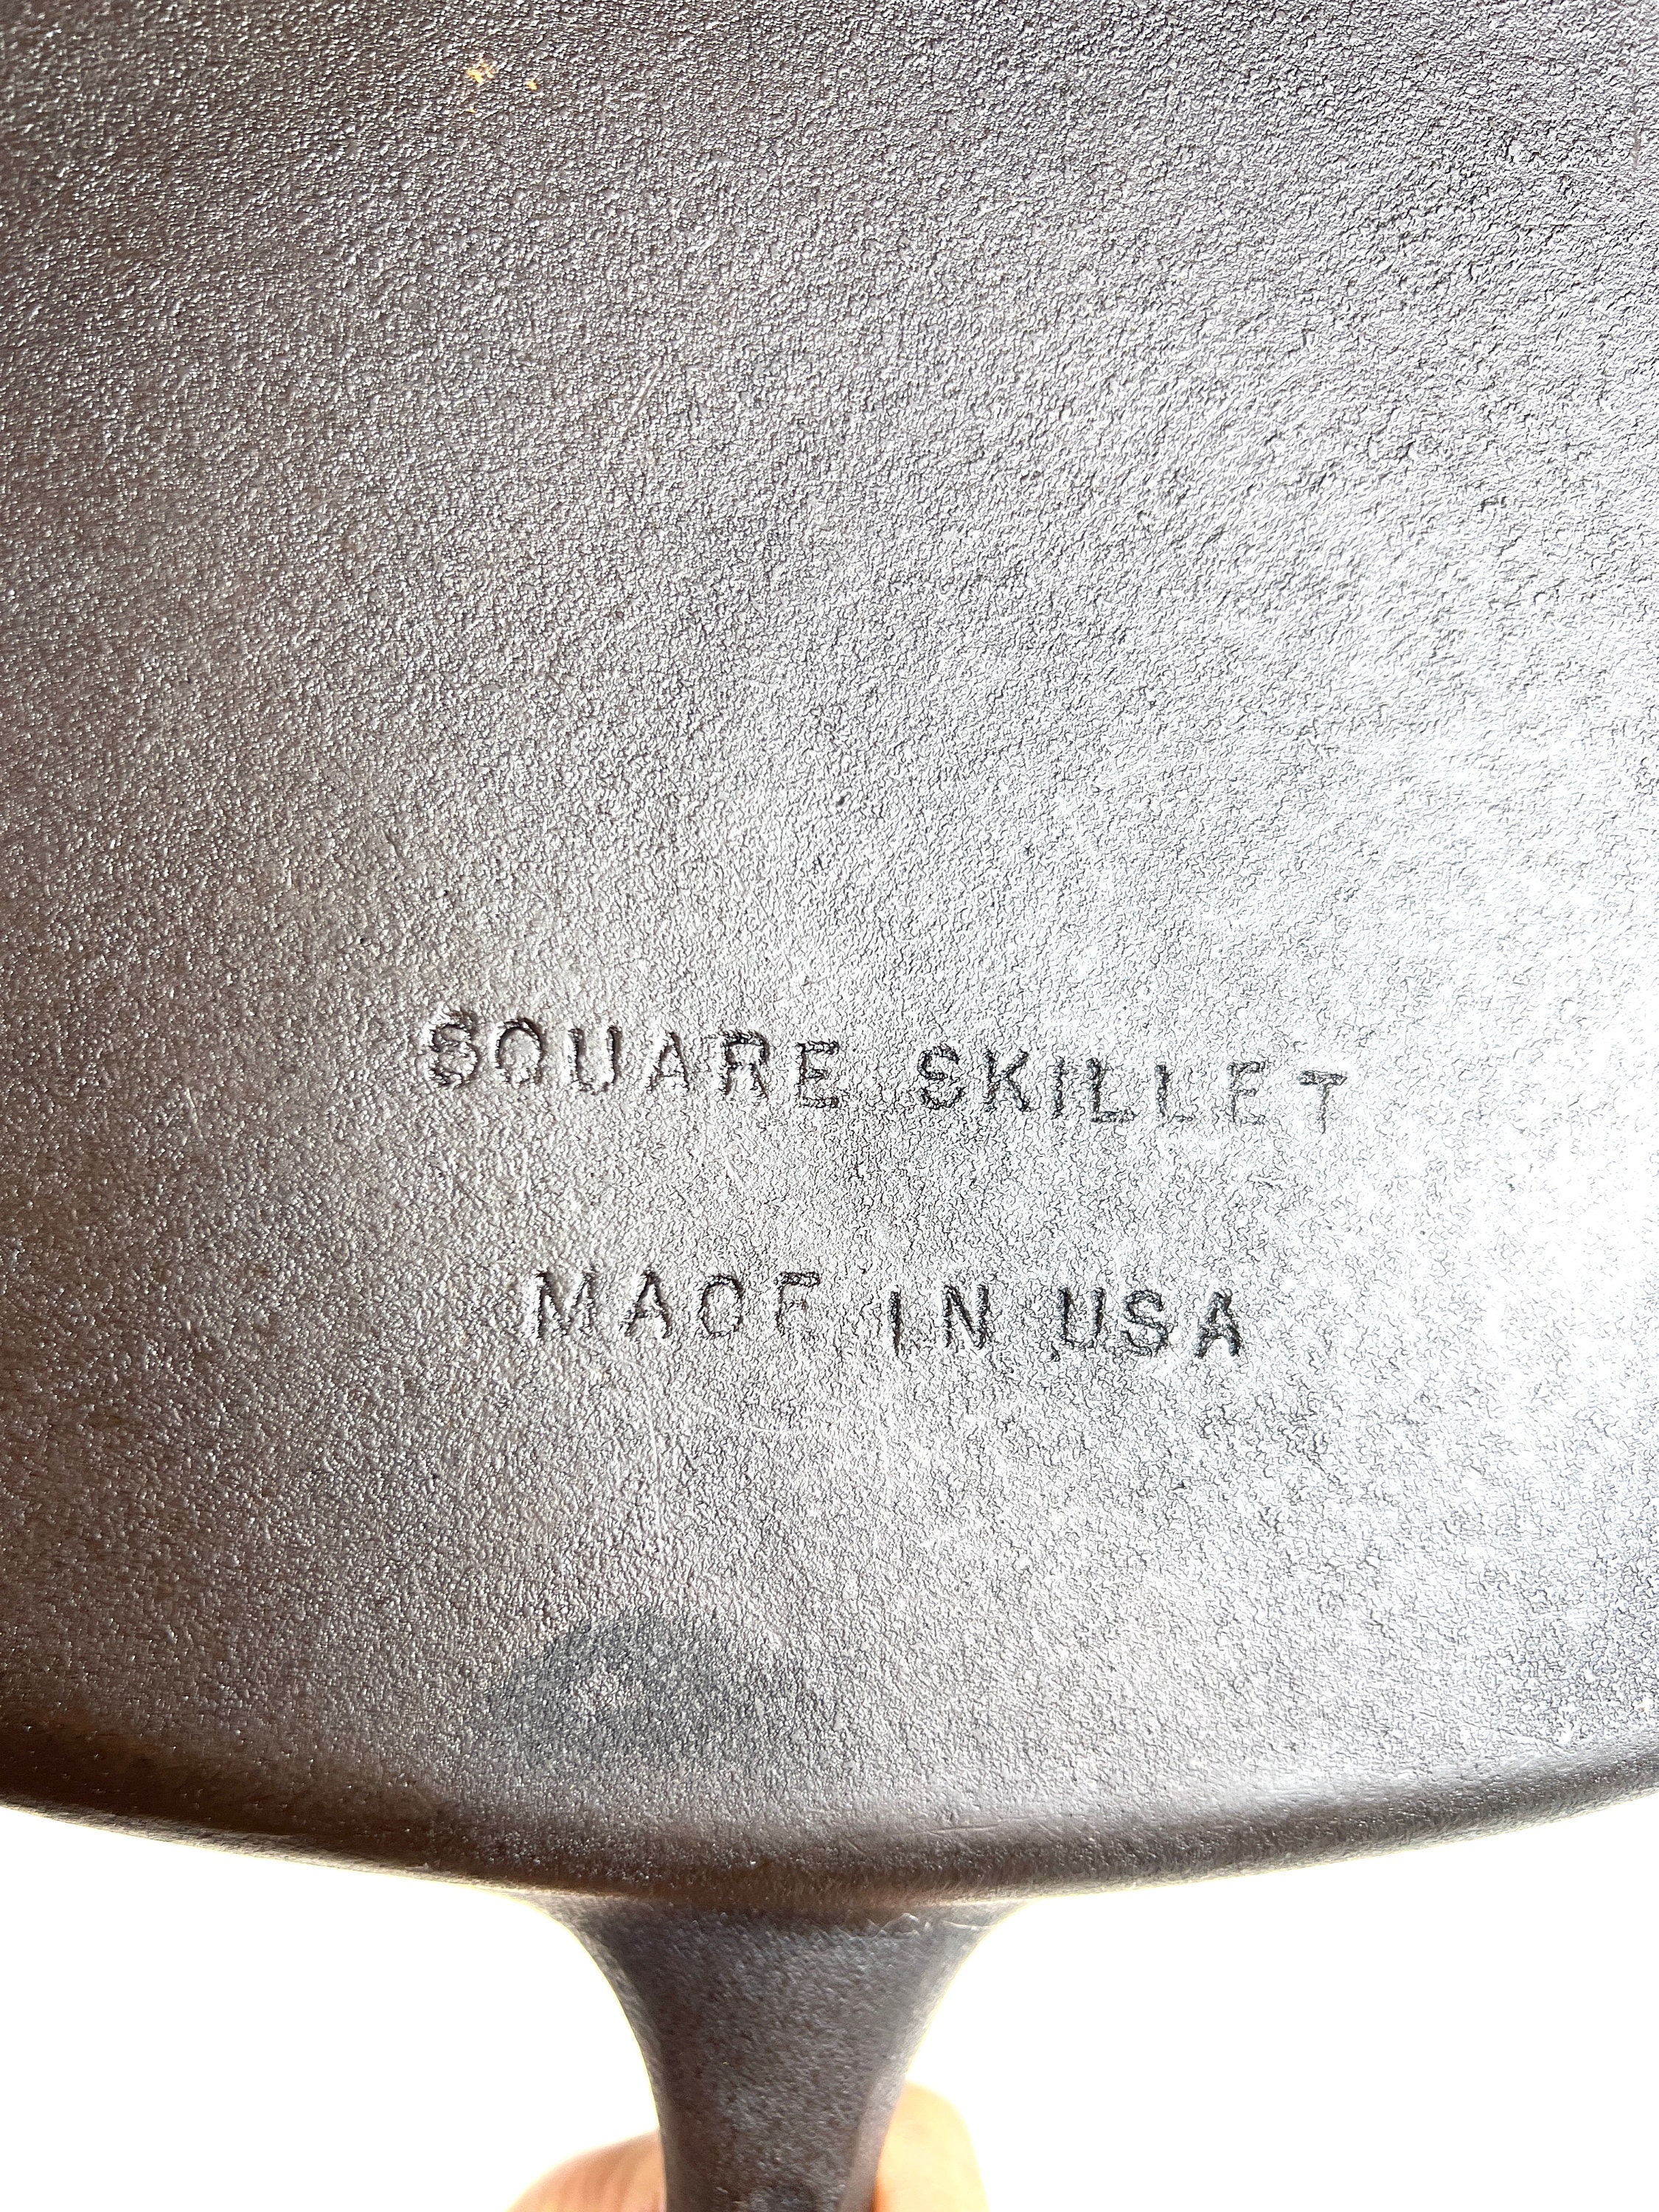 Unmarked WAGNER WARE Square Skillet Made in USA E & Krusty Korn Kob 1319